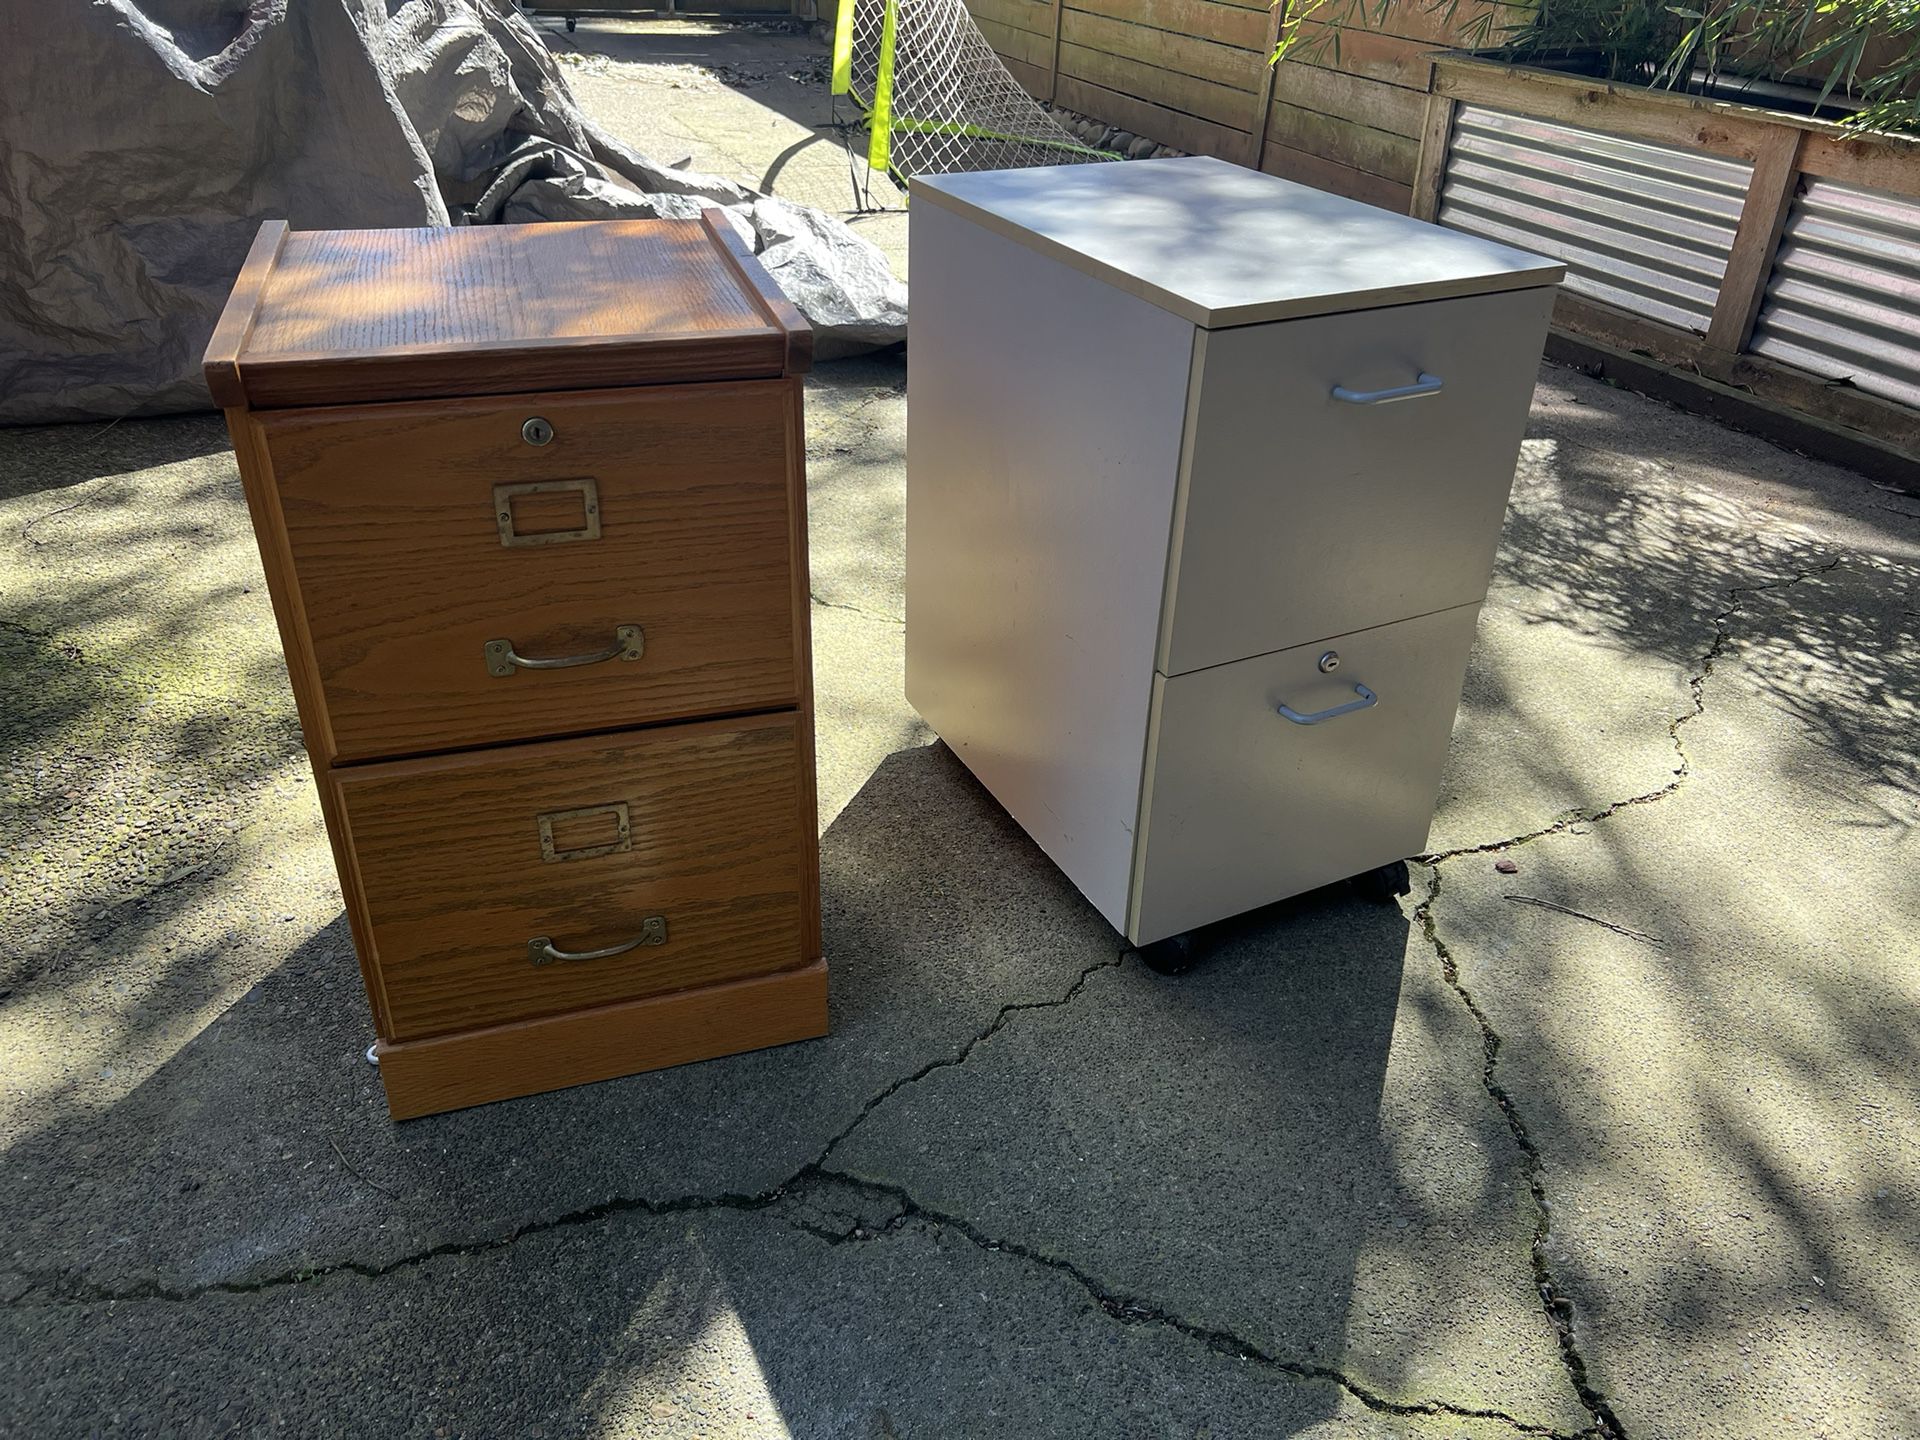 Filing Cabinets FREE